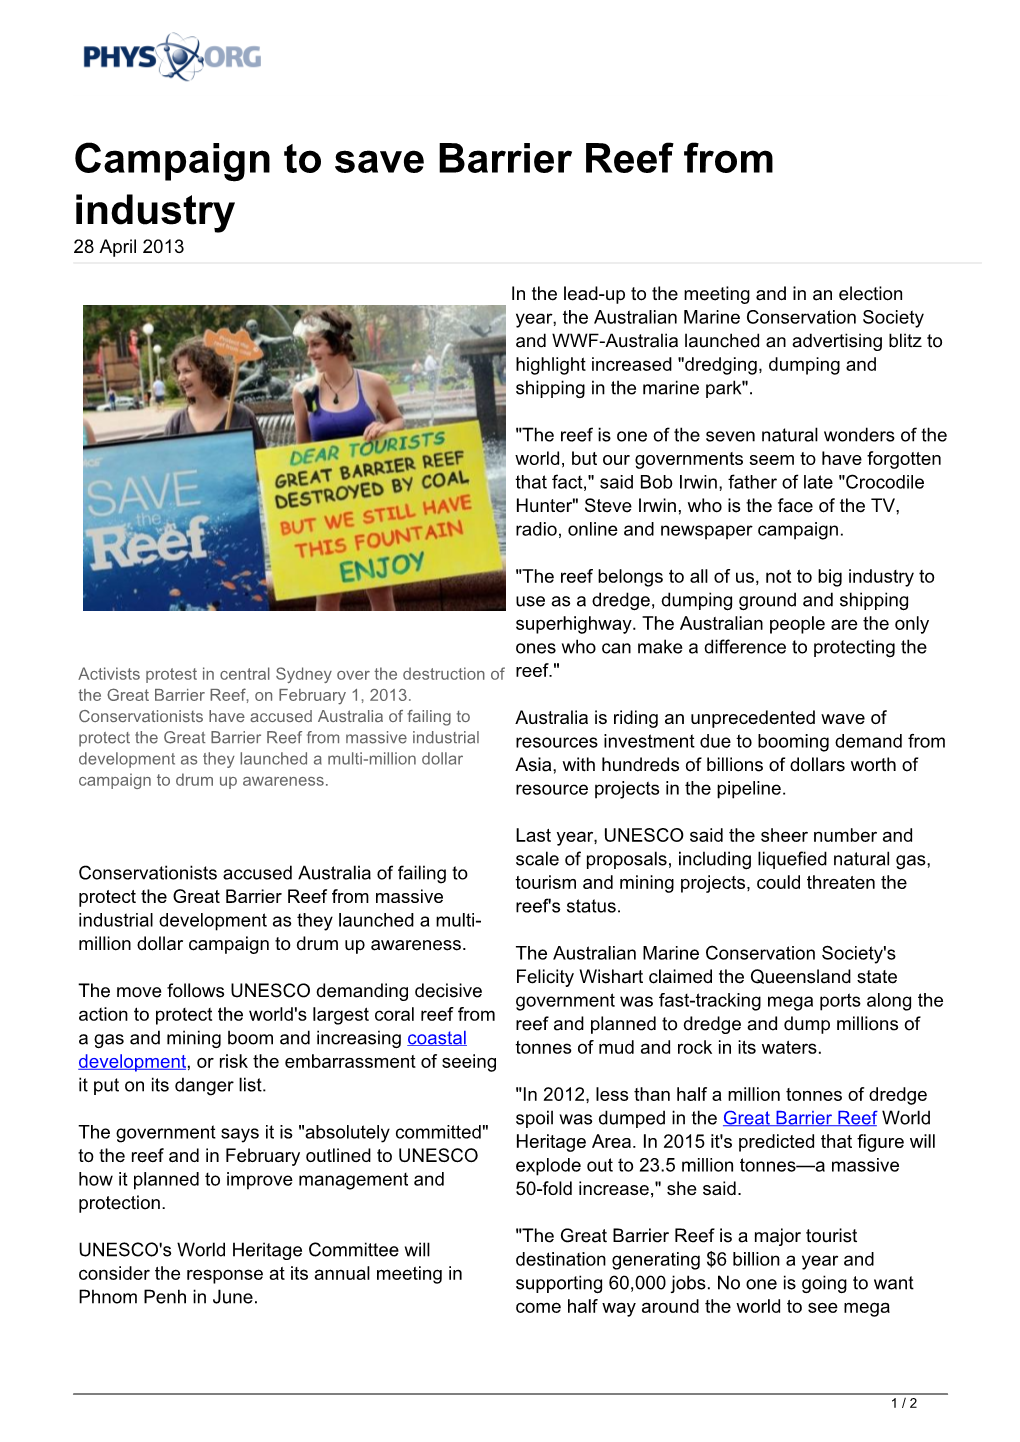 Campaign to Save Barrier Reef from Industry 28 April 2013